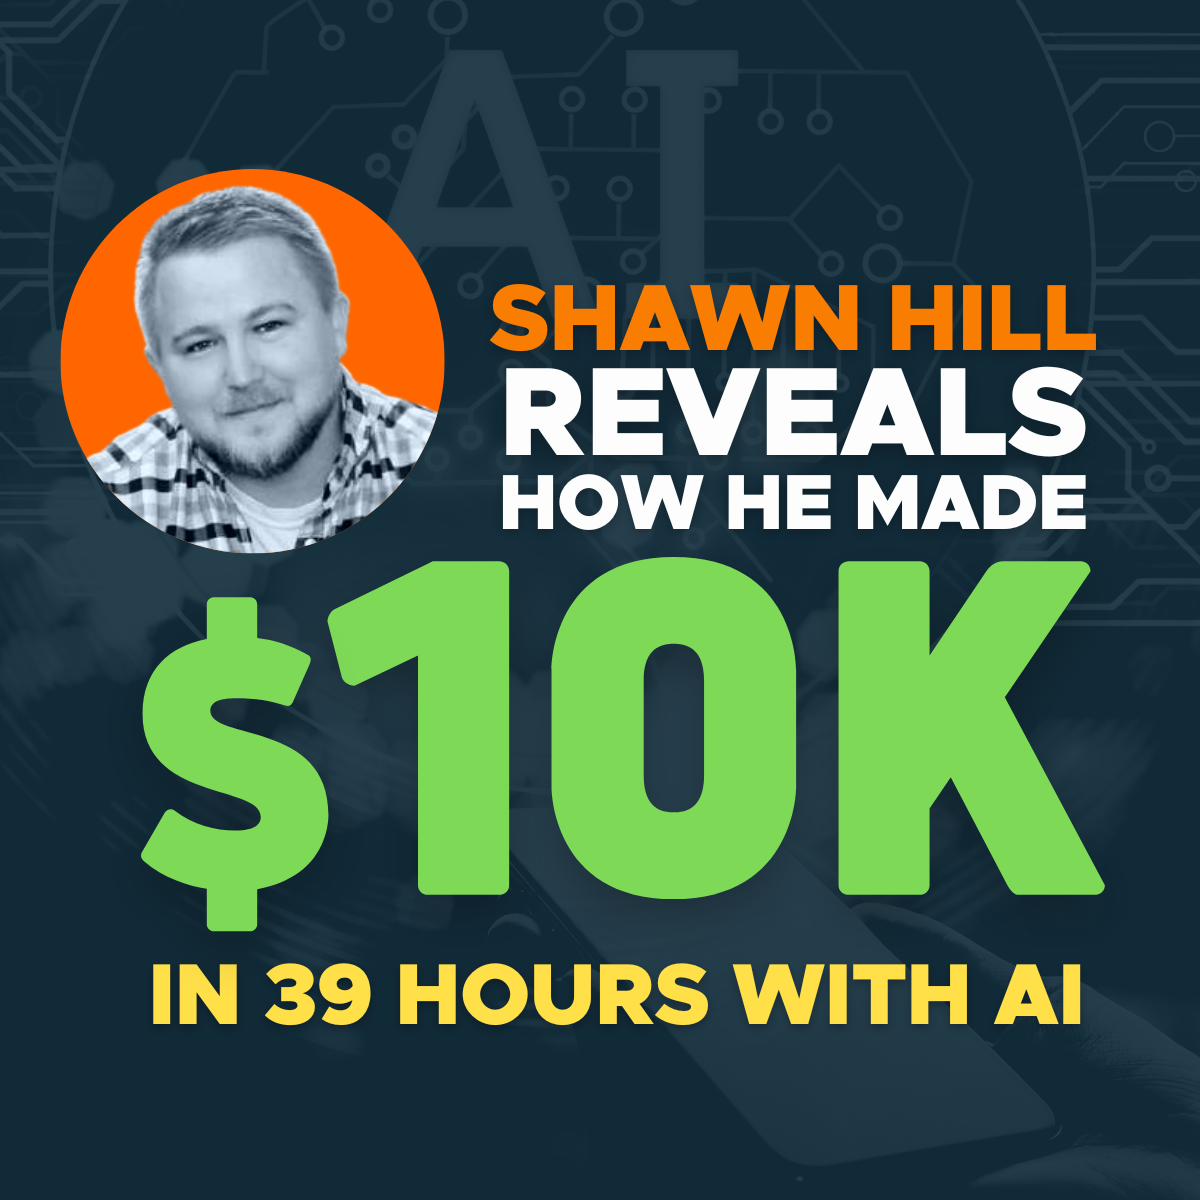 Shawn Hill Reveals How He Made $10k in 39 HOURS with AI